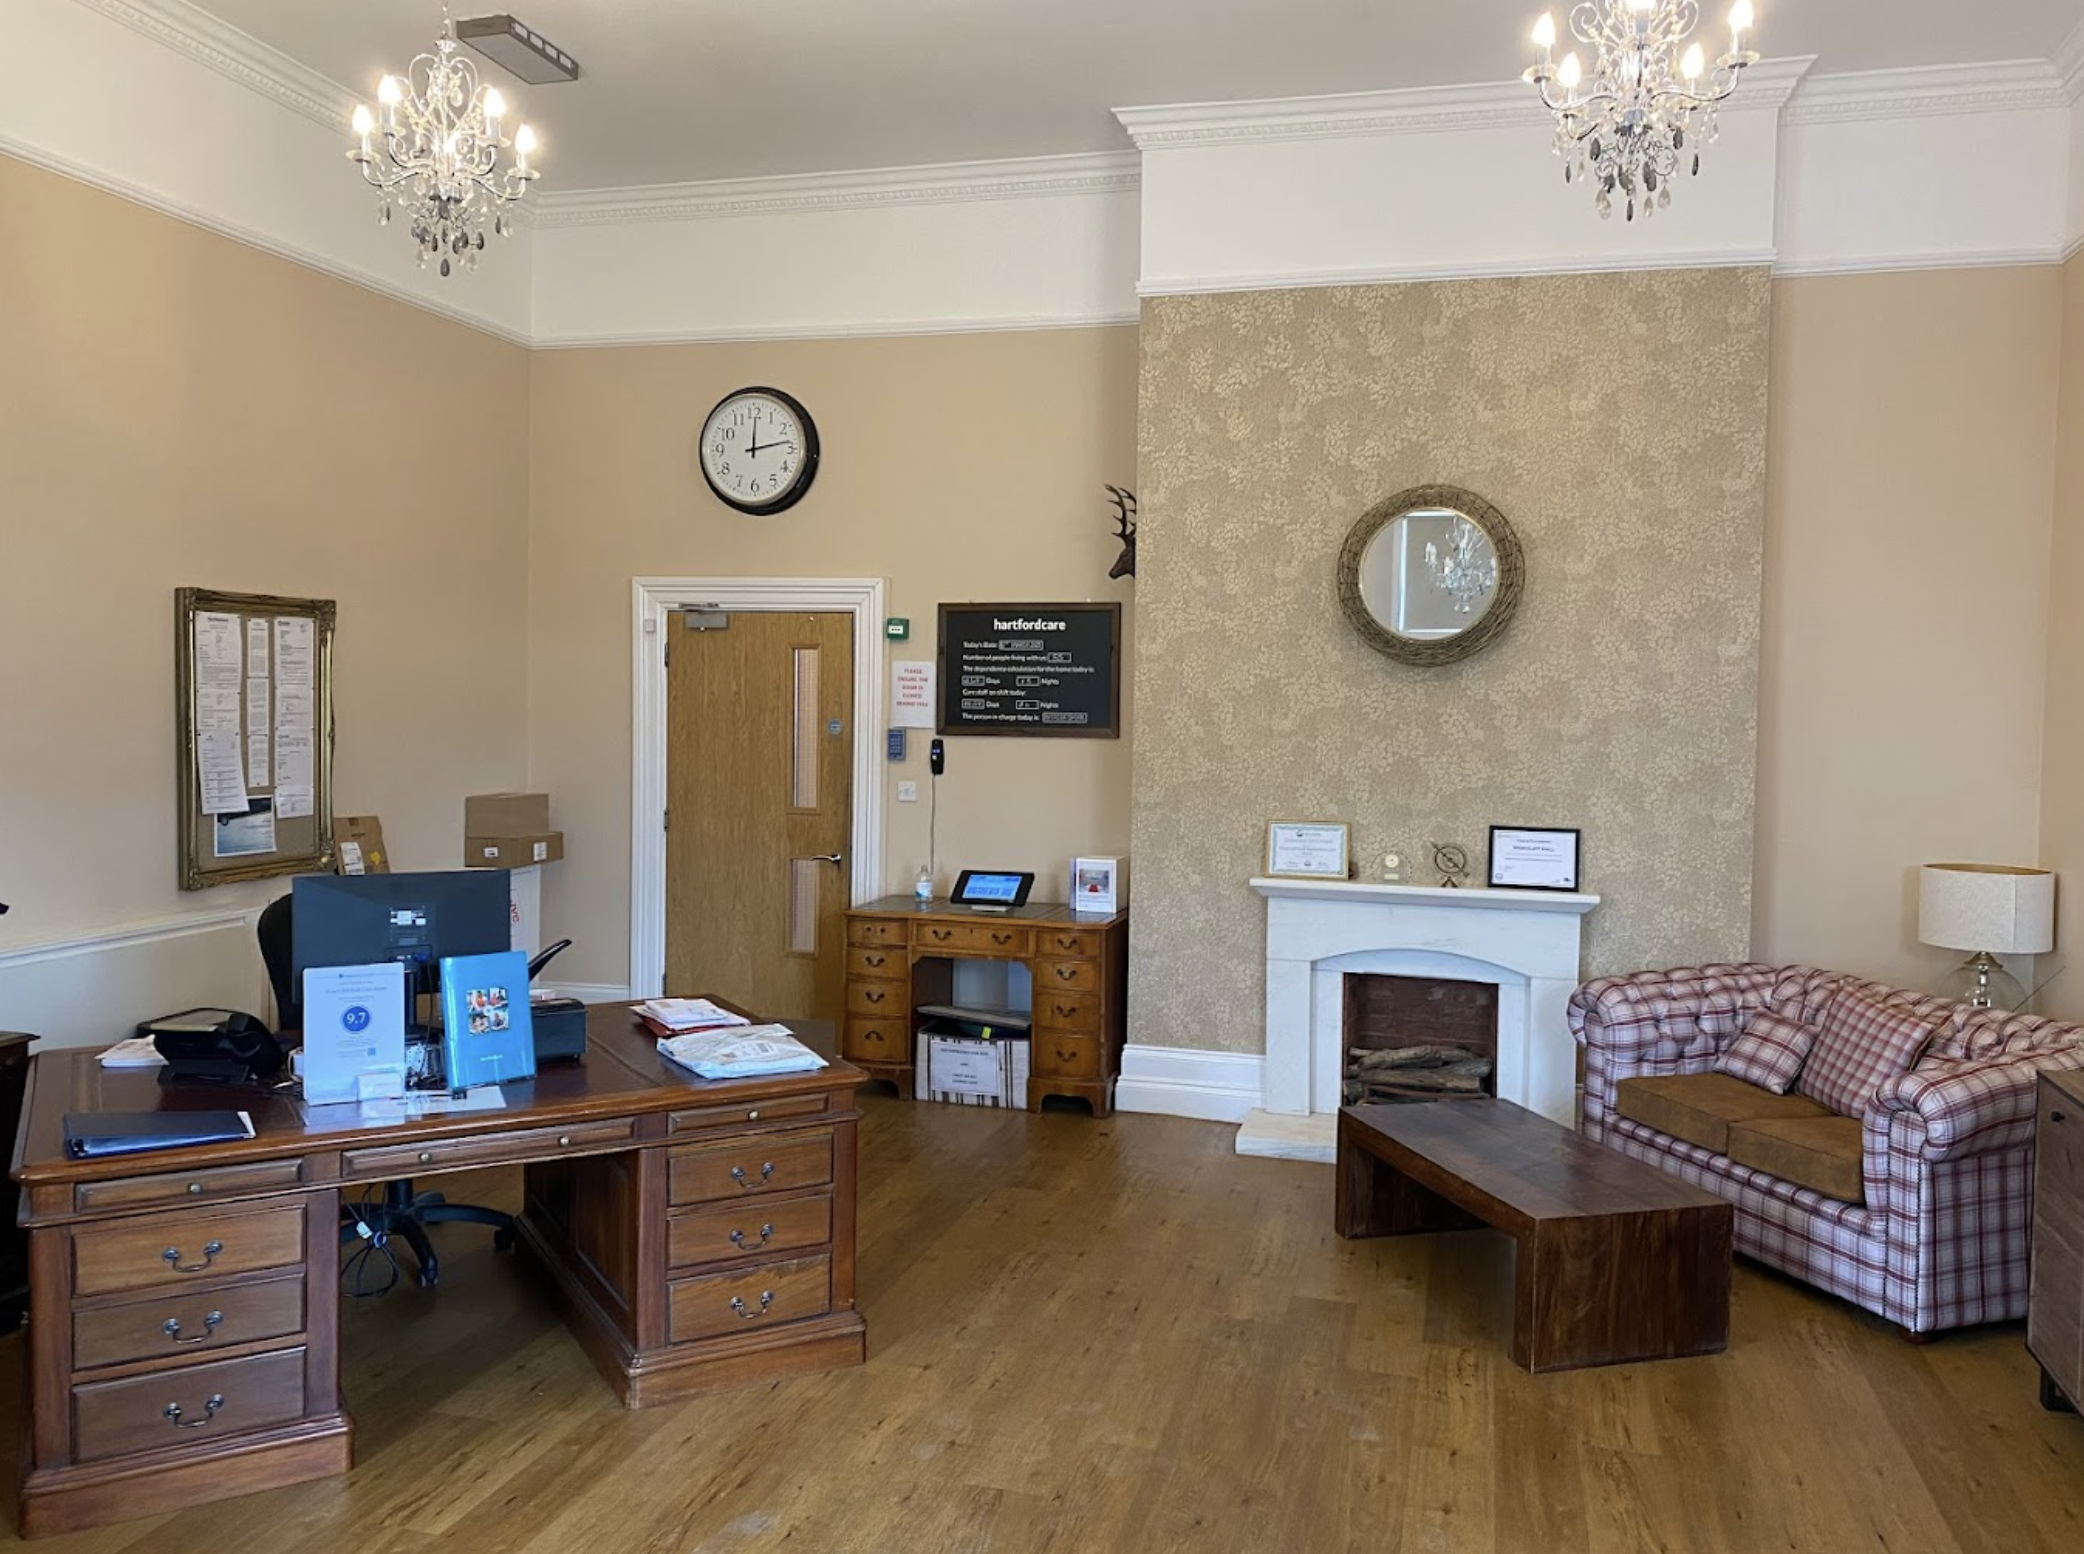 Reception area at West Cliff Hall Care Home in Hythe, Kent